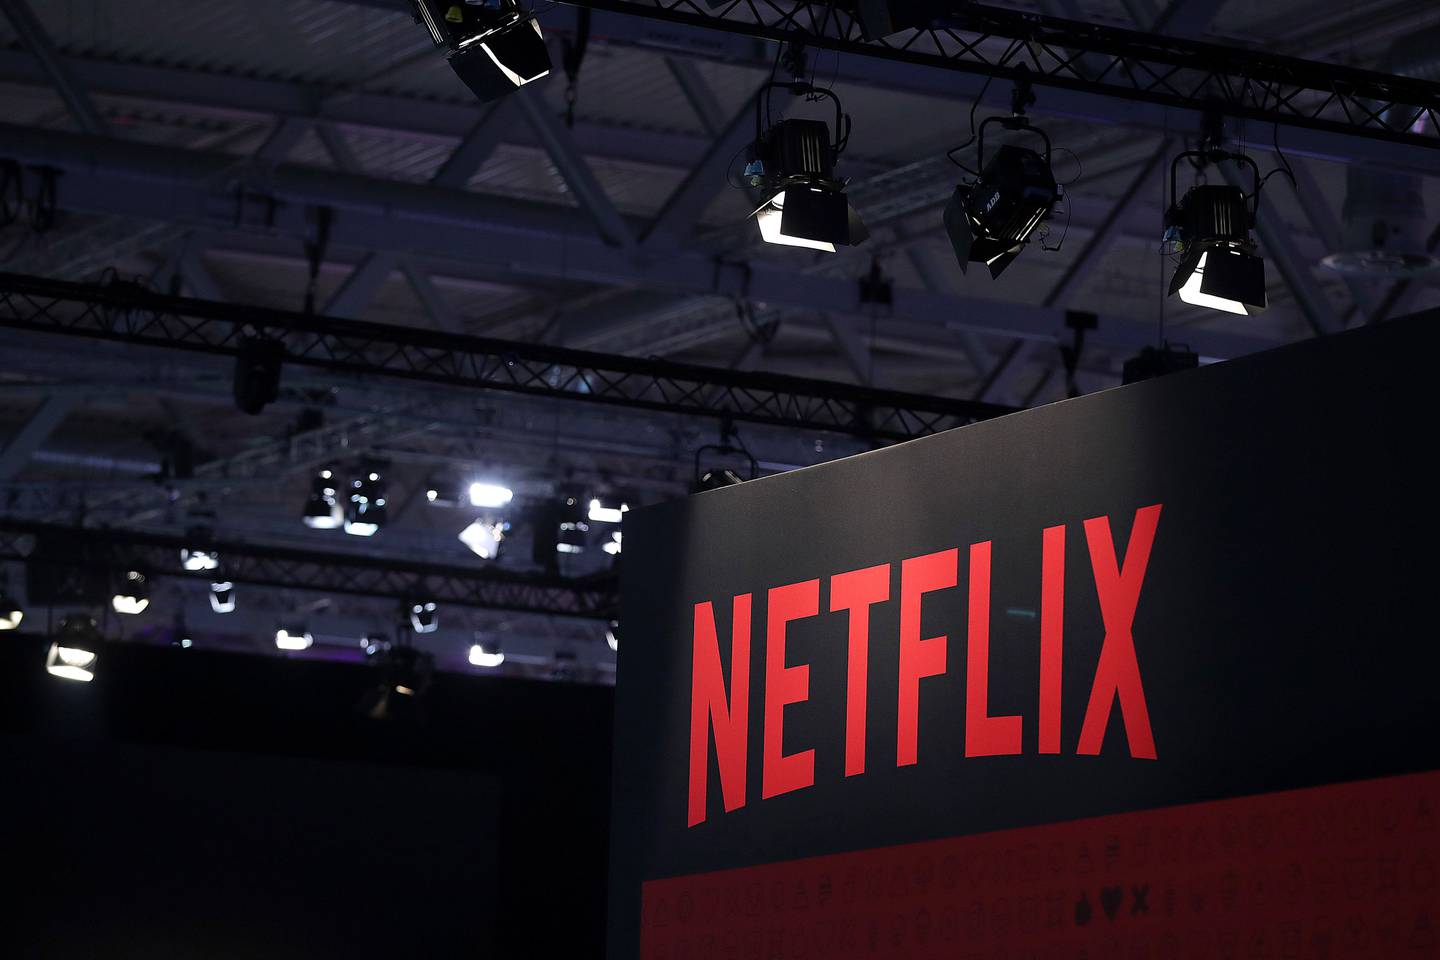 For the second quarter, revenue grew 8.6% to $7.97 billion, Netflix said. That missed Wall Street estimates of $8.04 billion, in part because of the strong dollar.